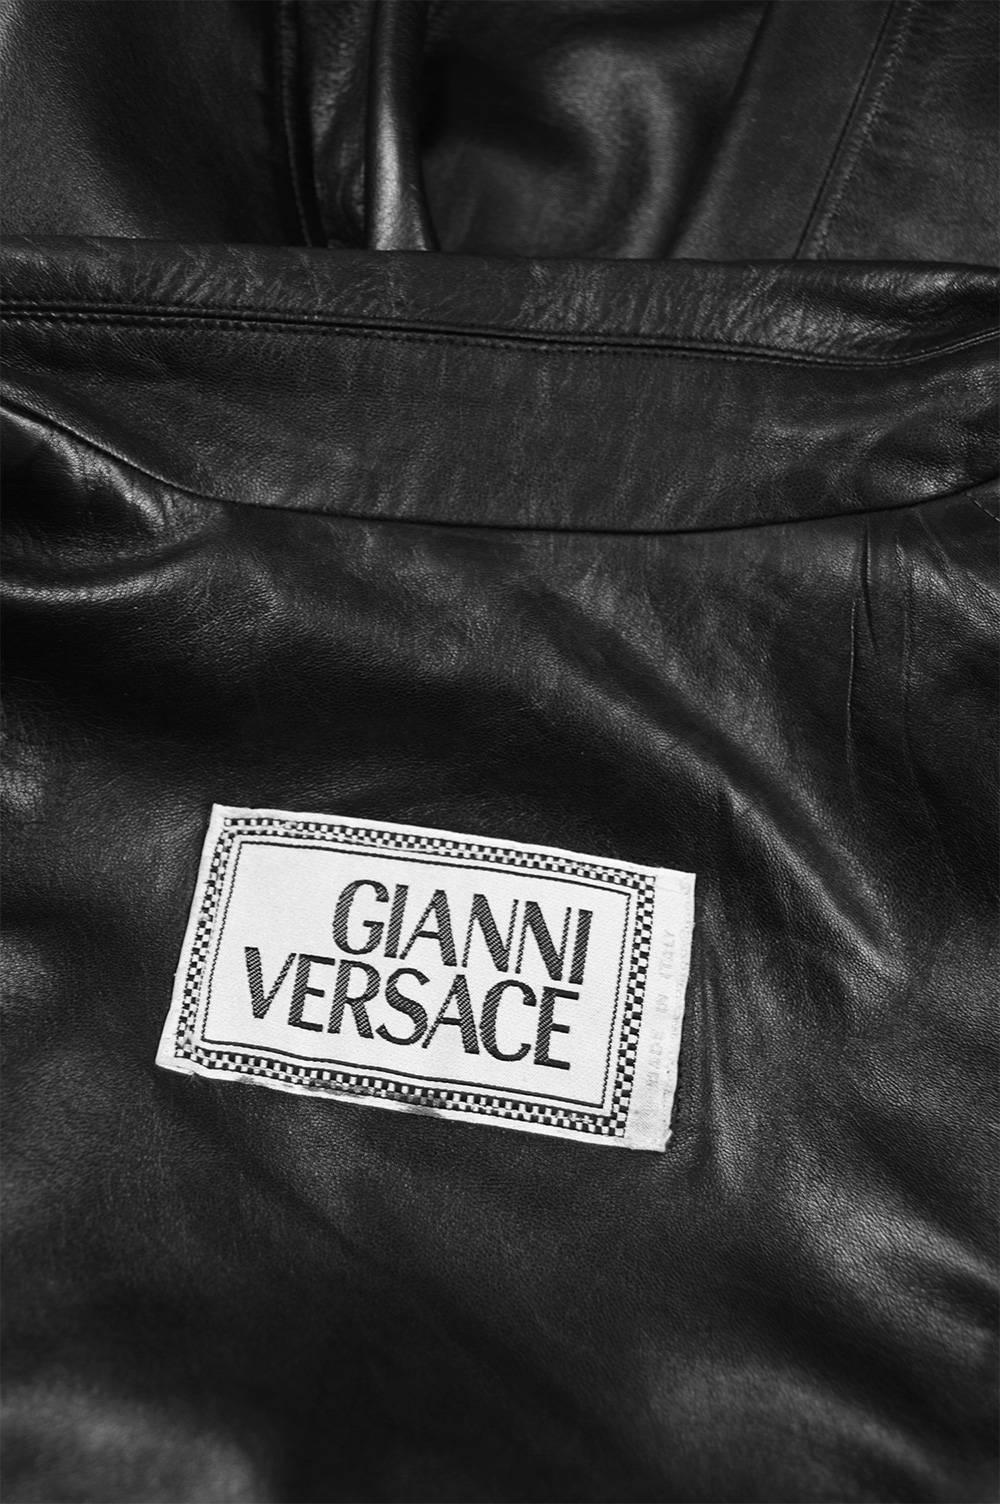 Gianni Versace Men's Black Leather Long Maxi Trench Coat, F/W 1998 2